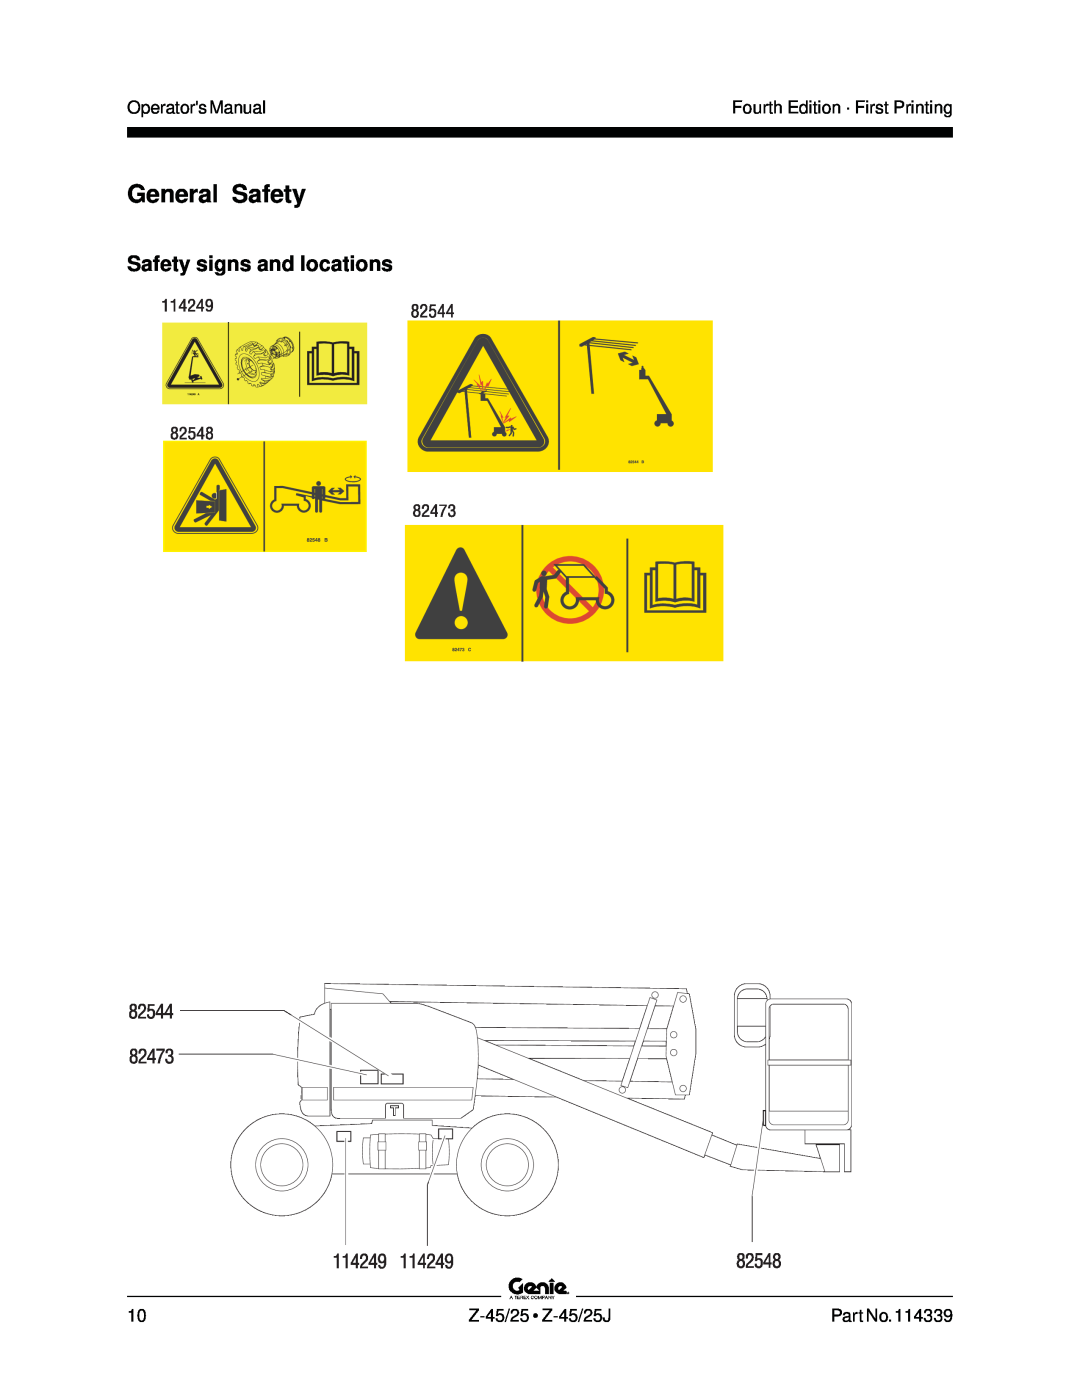 Genie Z-45, Z-25 manual General Safety, Safety signs and locations, Operators Manual, Fourth Edition · First Printing 